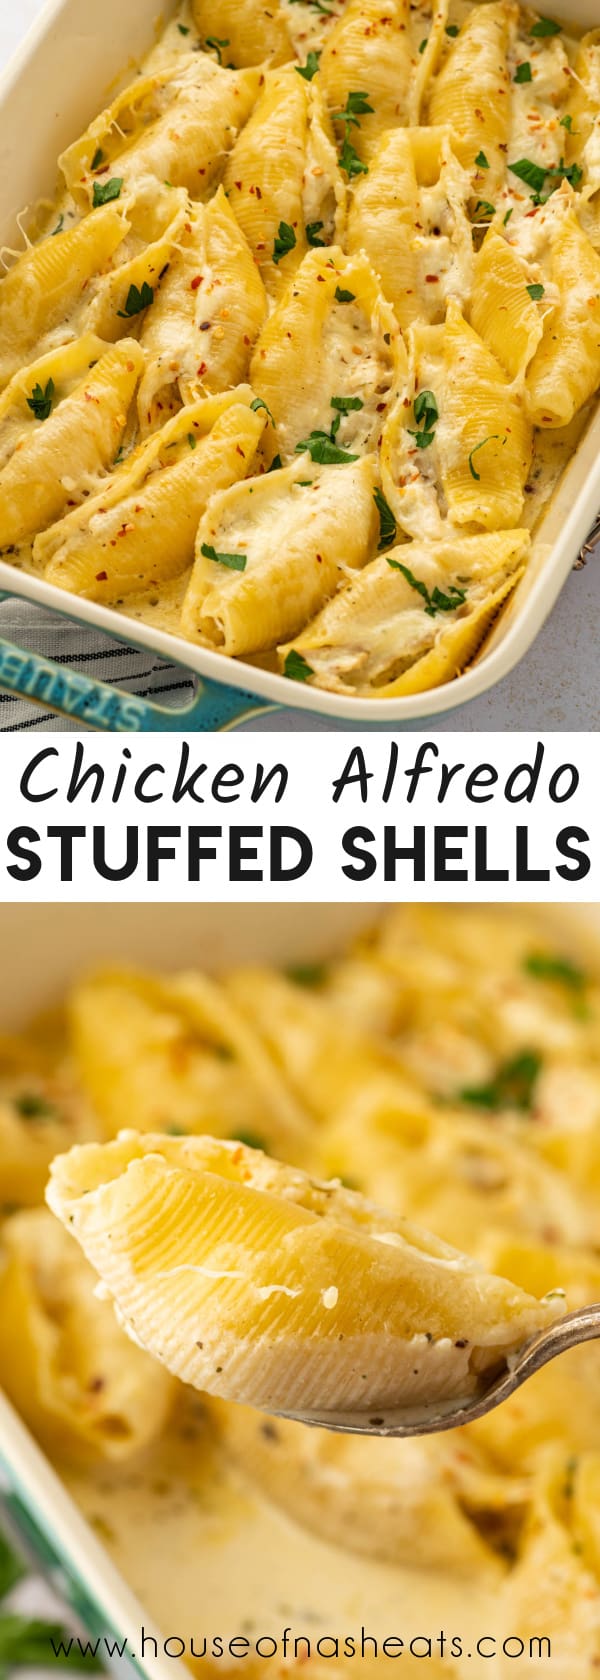 A collage of images of chicken alfredo stuffed shells with text overlay.